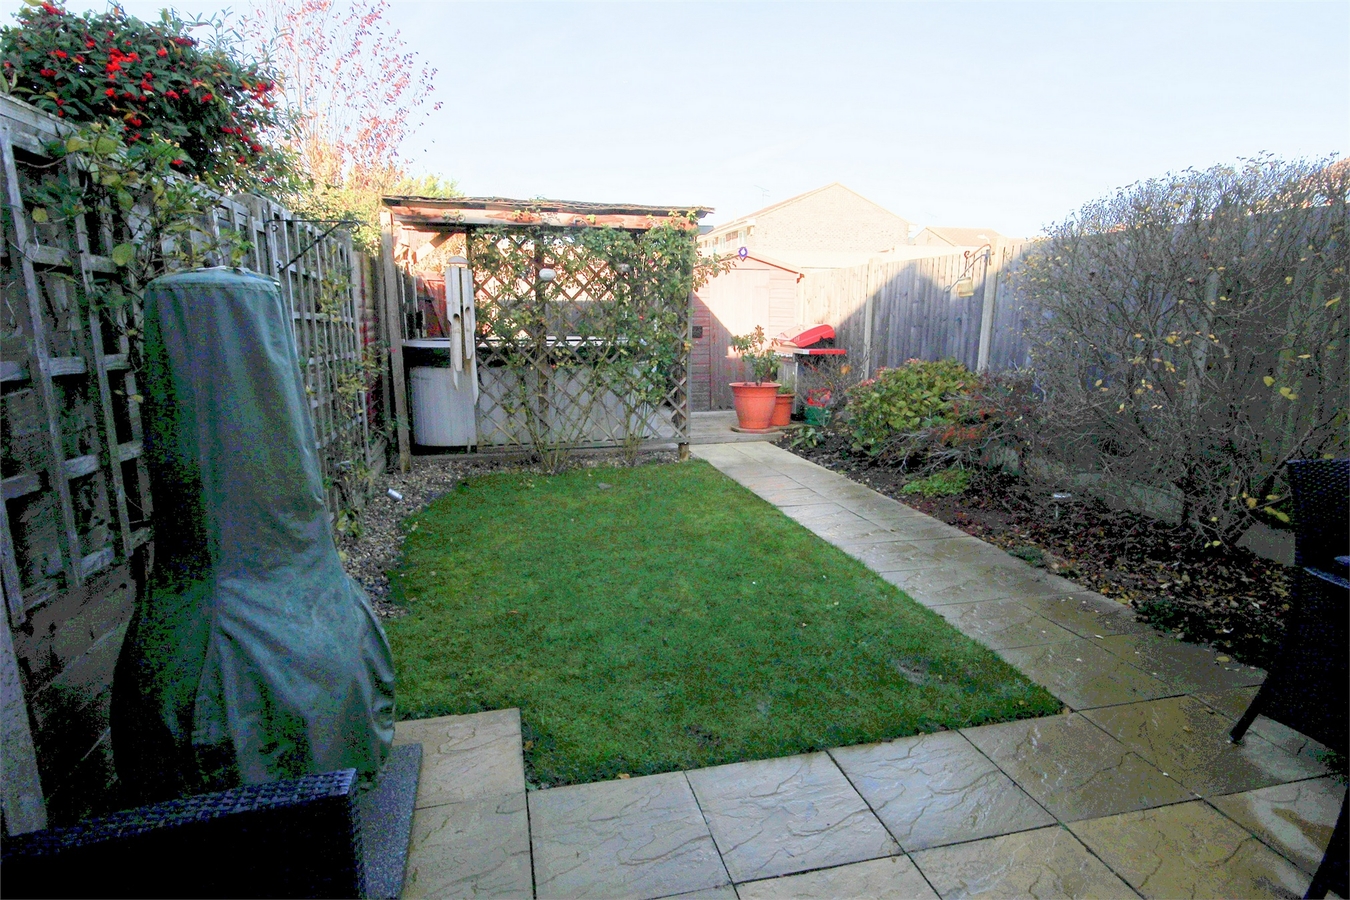 3 Bedrooms End terrace house for sale in Jasmine Close, Chelmsford, Essex CM1